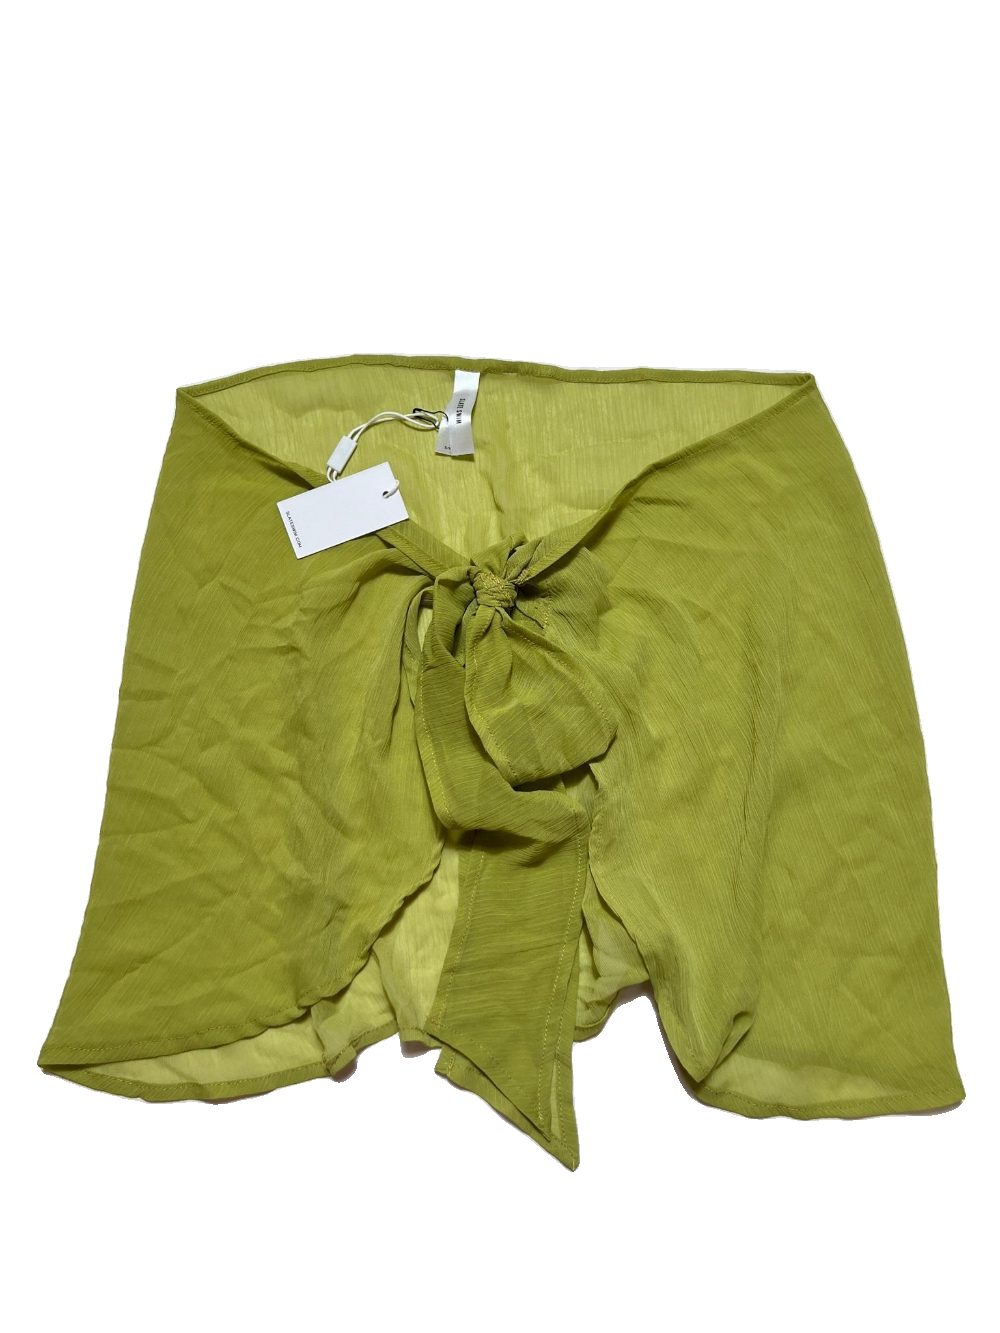 Slate Swim- Green Cover Up NEW WITH TAGS!